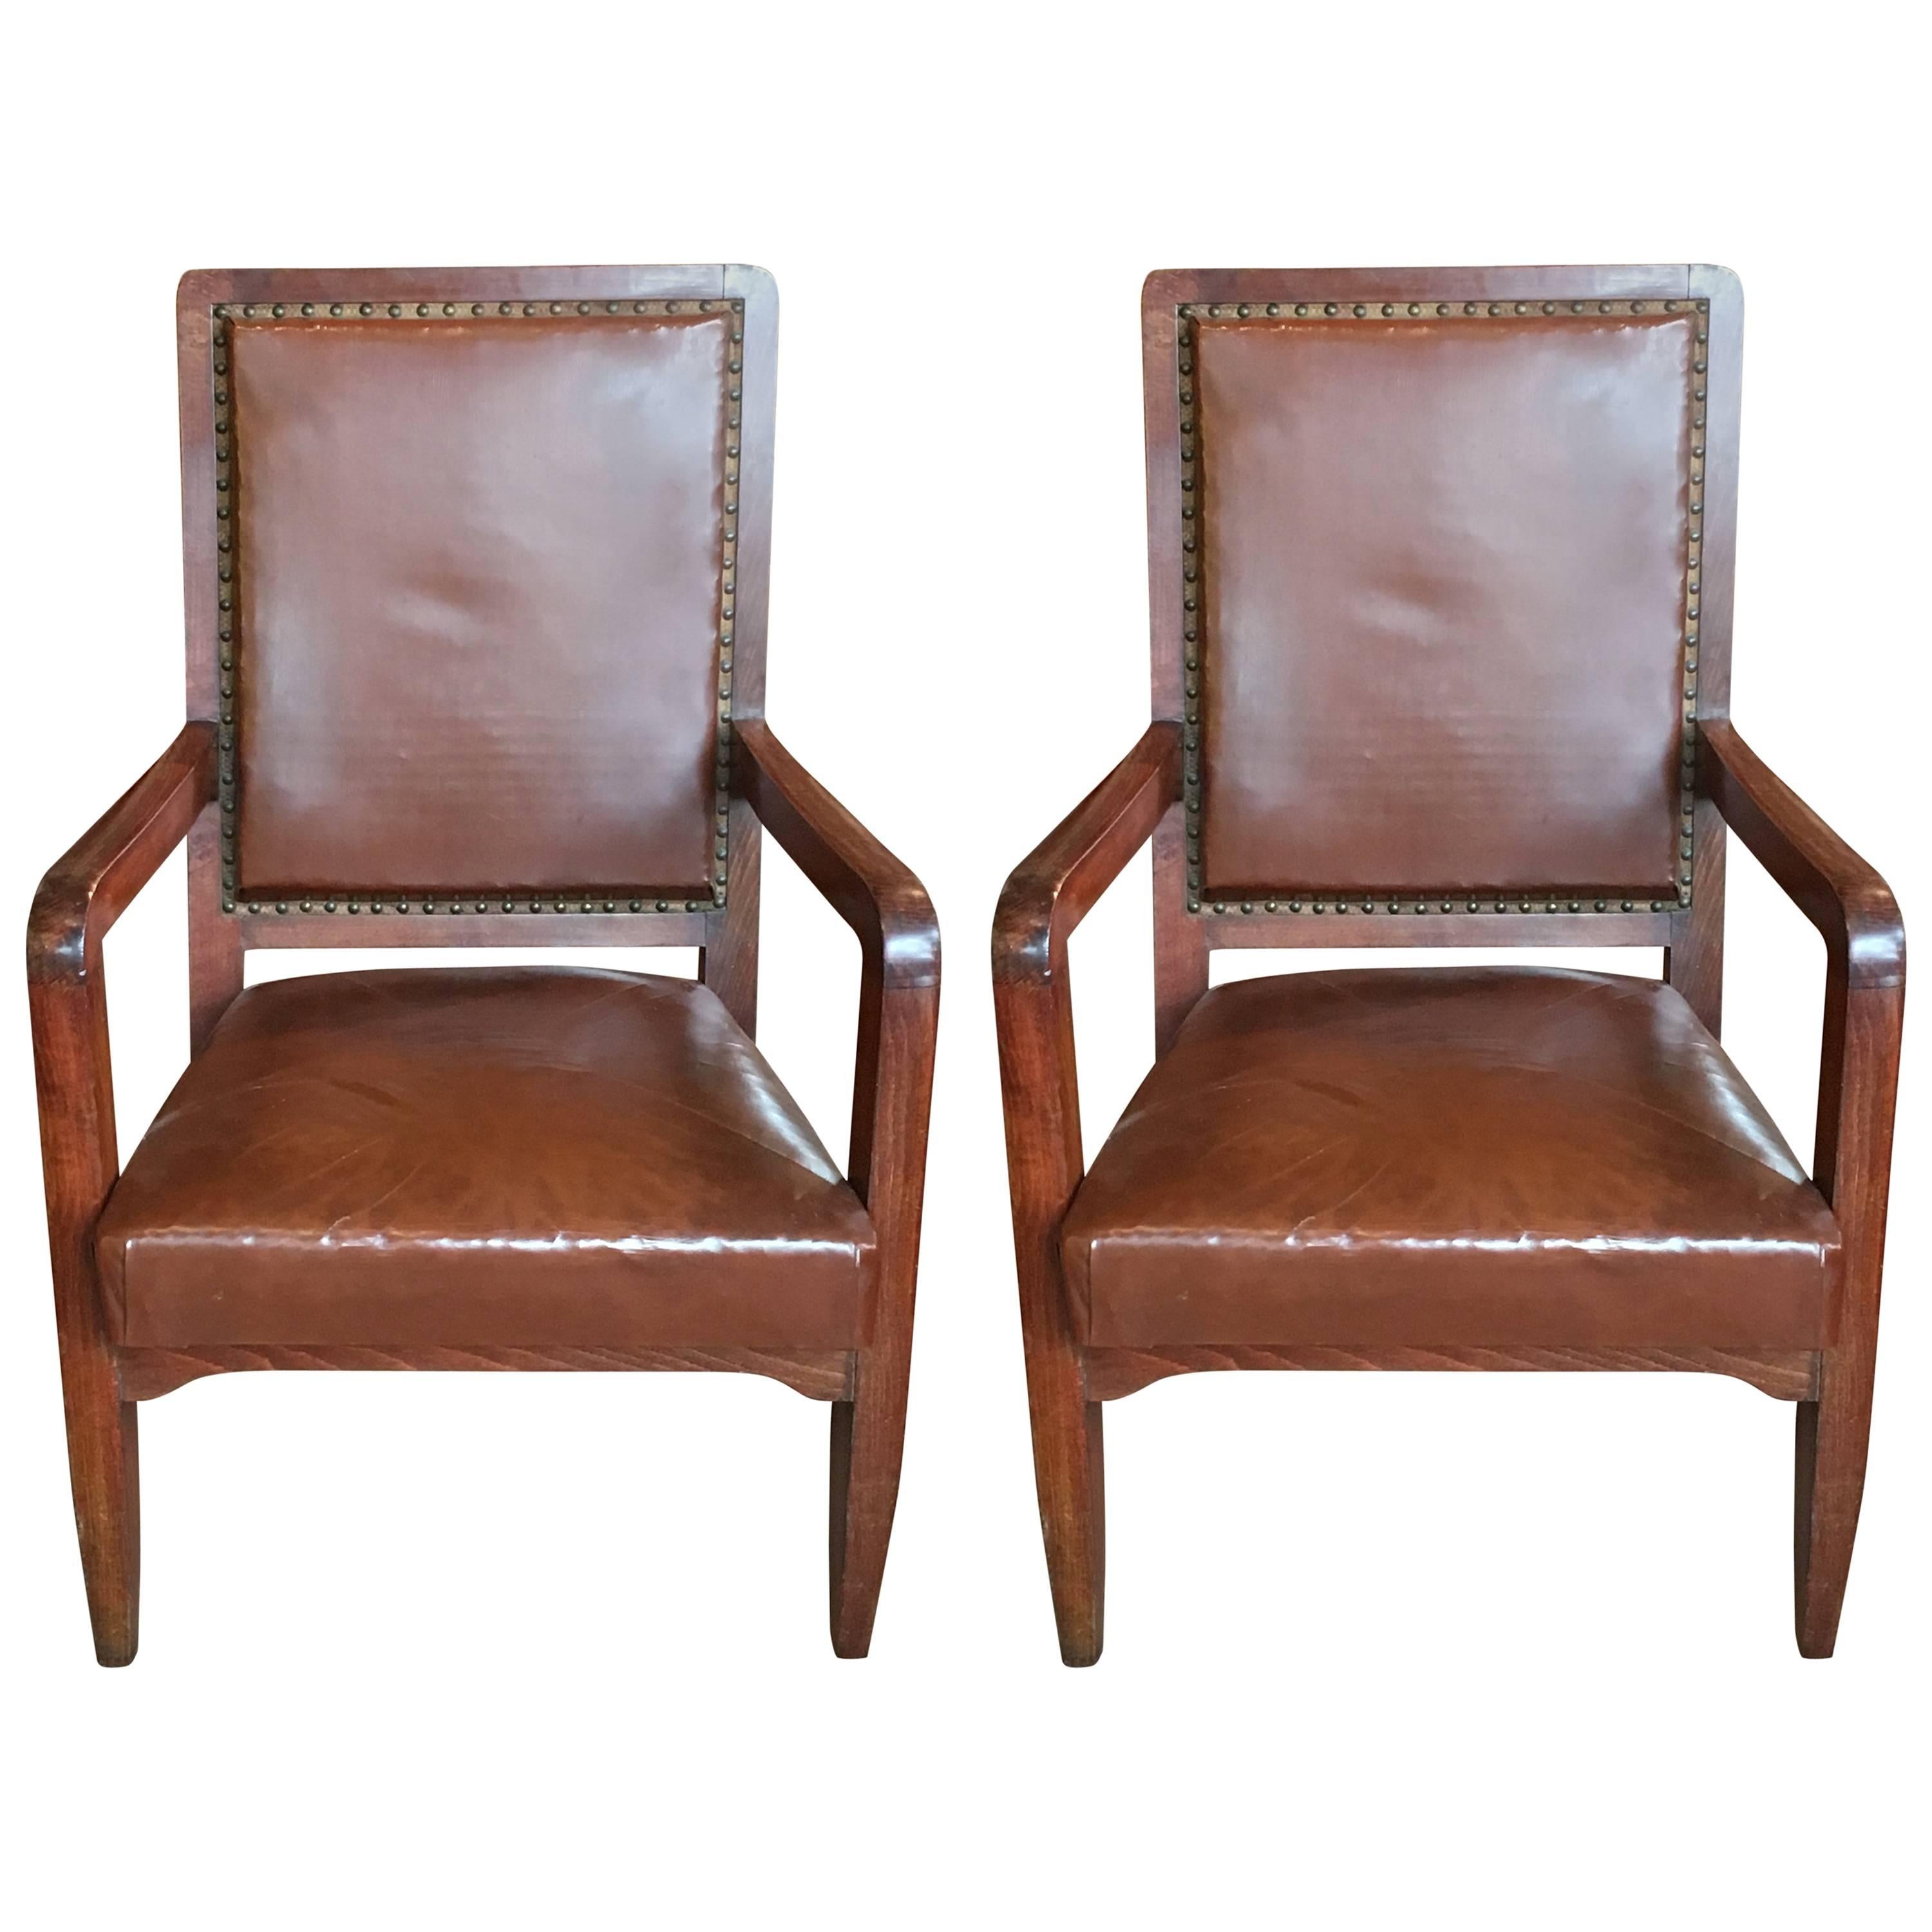 Pair of French walnut library chairs with original boxed back and horsehair upholstery; Substantial and sturdy, stamped with unidentified makers numbers.
Avantgarden Ltd. cultivates unexpected and exceptional lighting, furniture and design.  To view